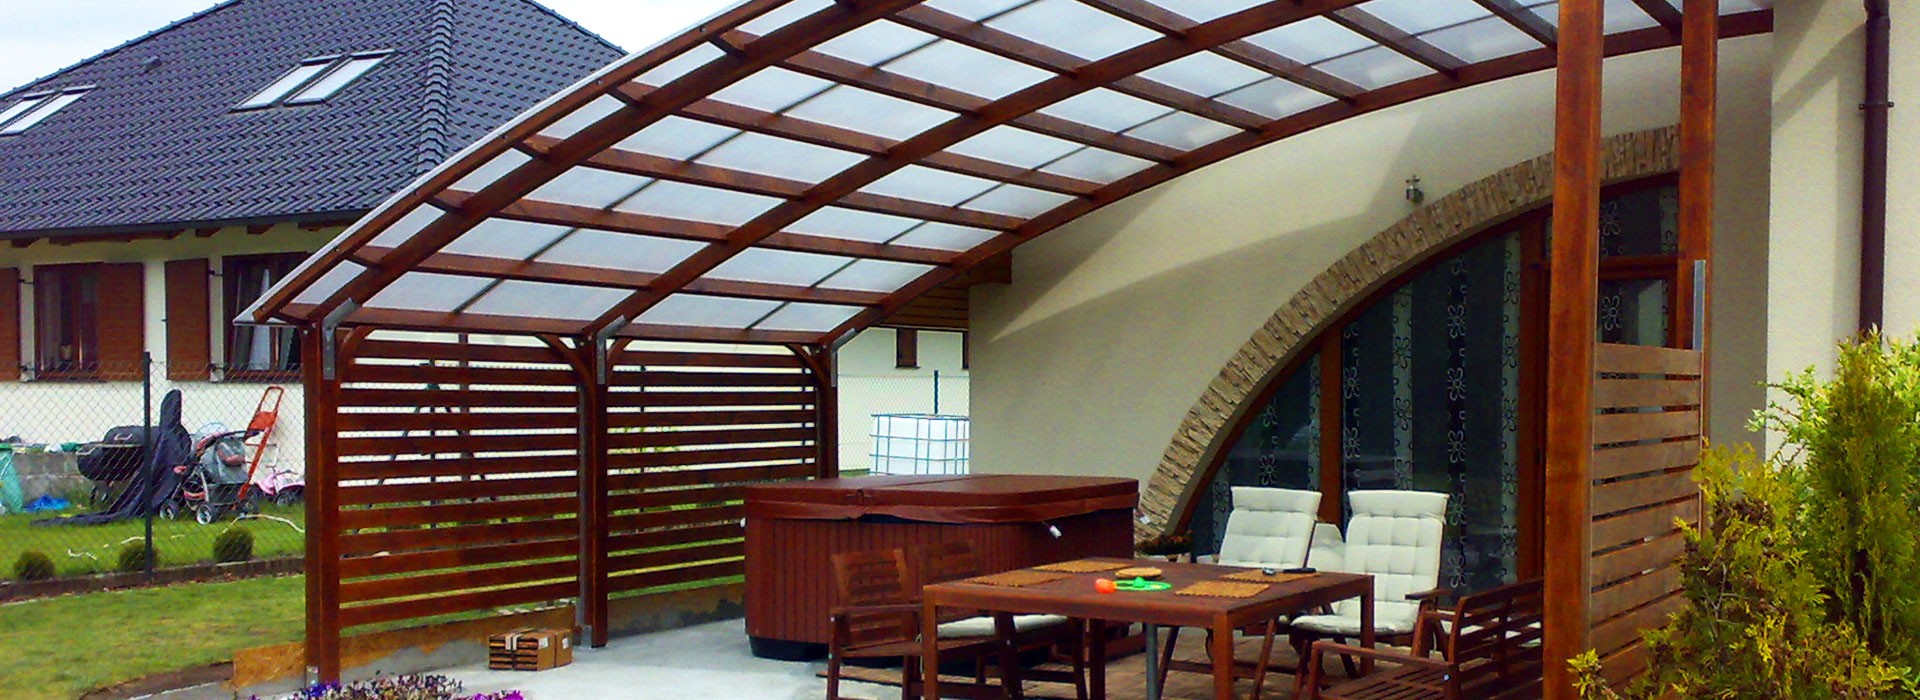 Pergola made of wood open without roofing